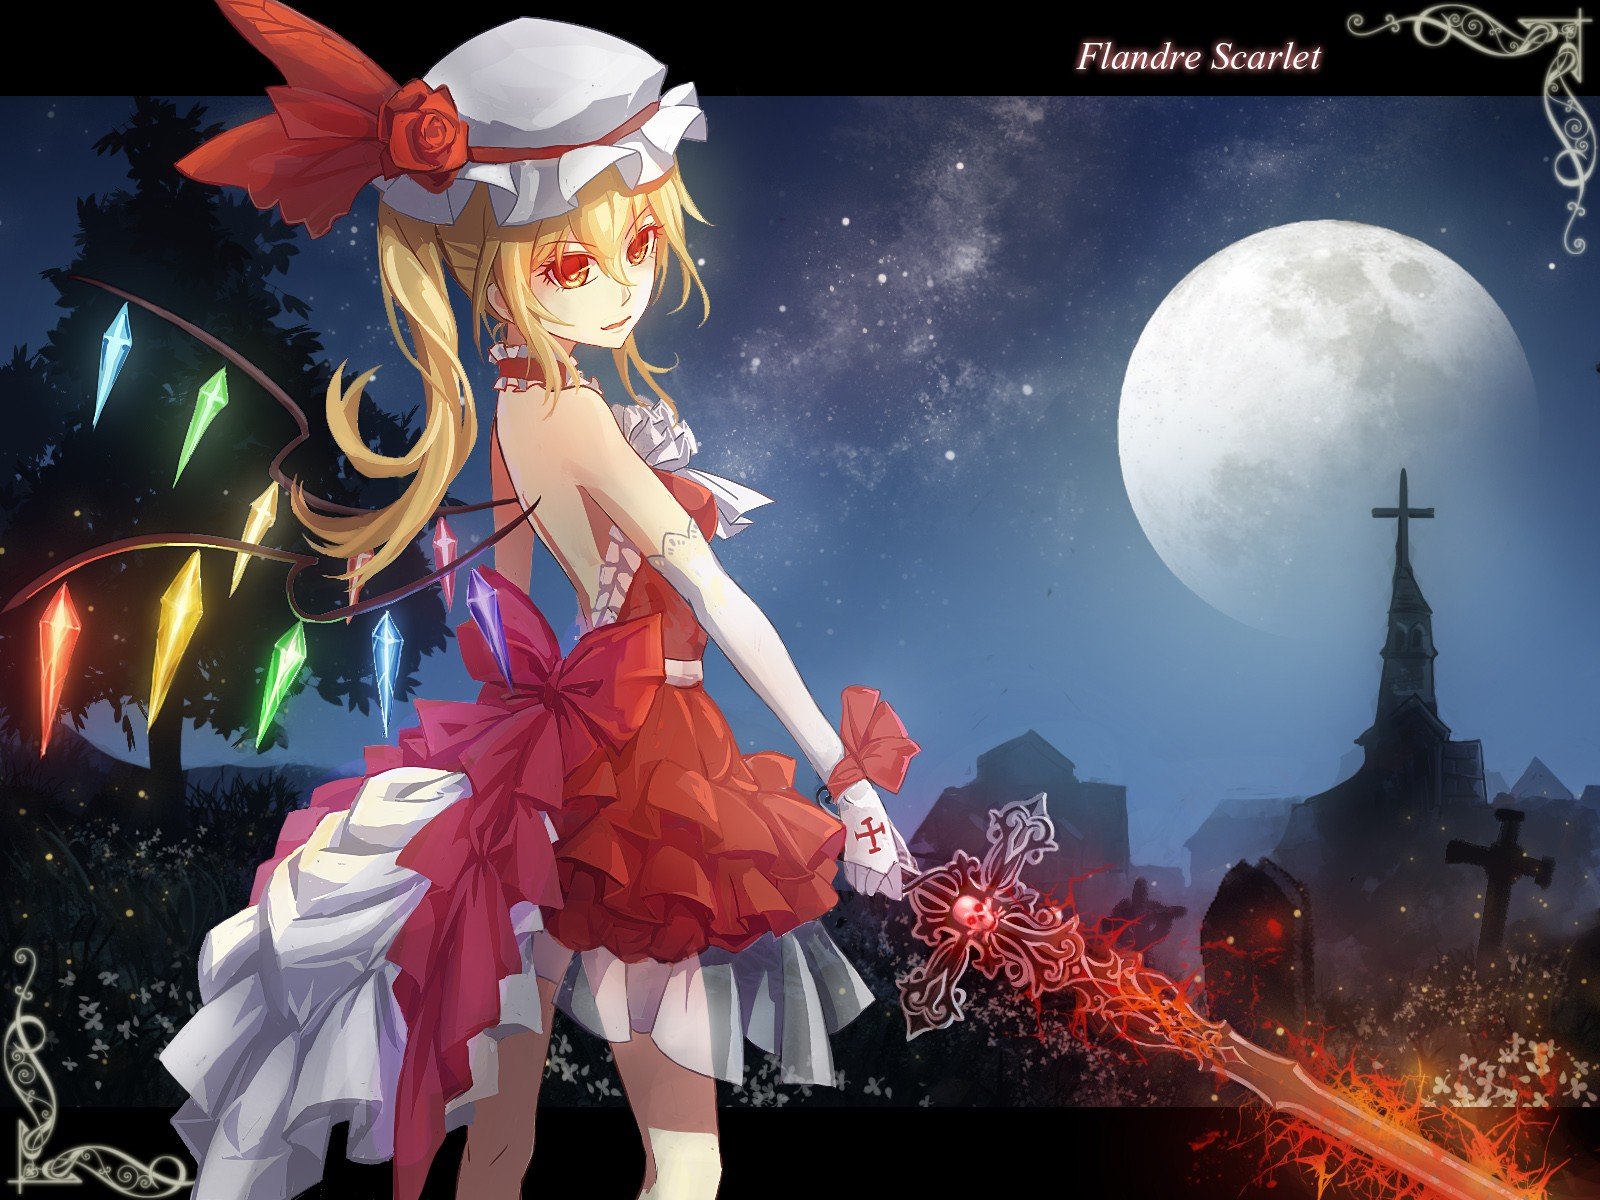 blondes, Video, Games, Touhou, Wings, Trees, Gloves, Dress, Flowers, Stars, Text, Moon, Grass, Houses, Long, Hair, Weapons, Vampires, Red, Eyes, Churches, Crystals, Tombstones, Flandre, Scarlet, Hats, Anime, Gir Wallpaper